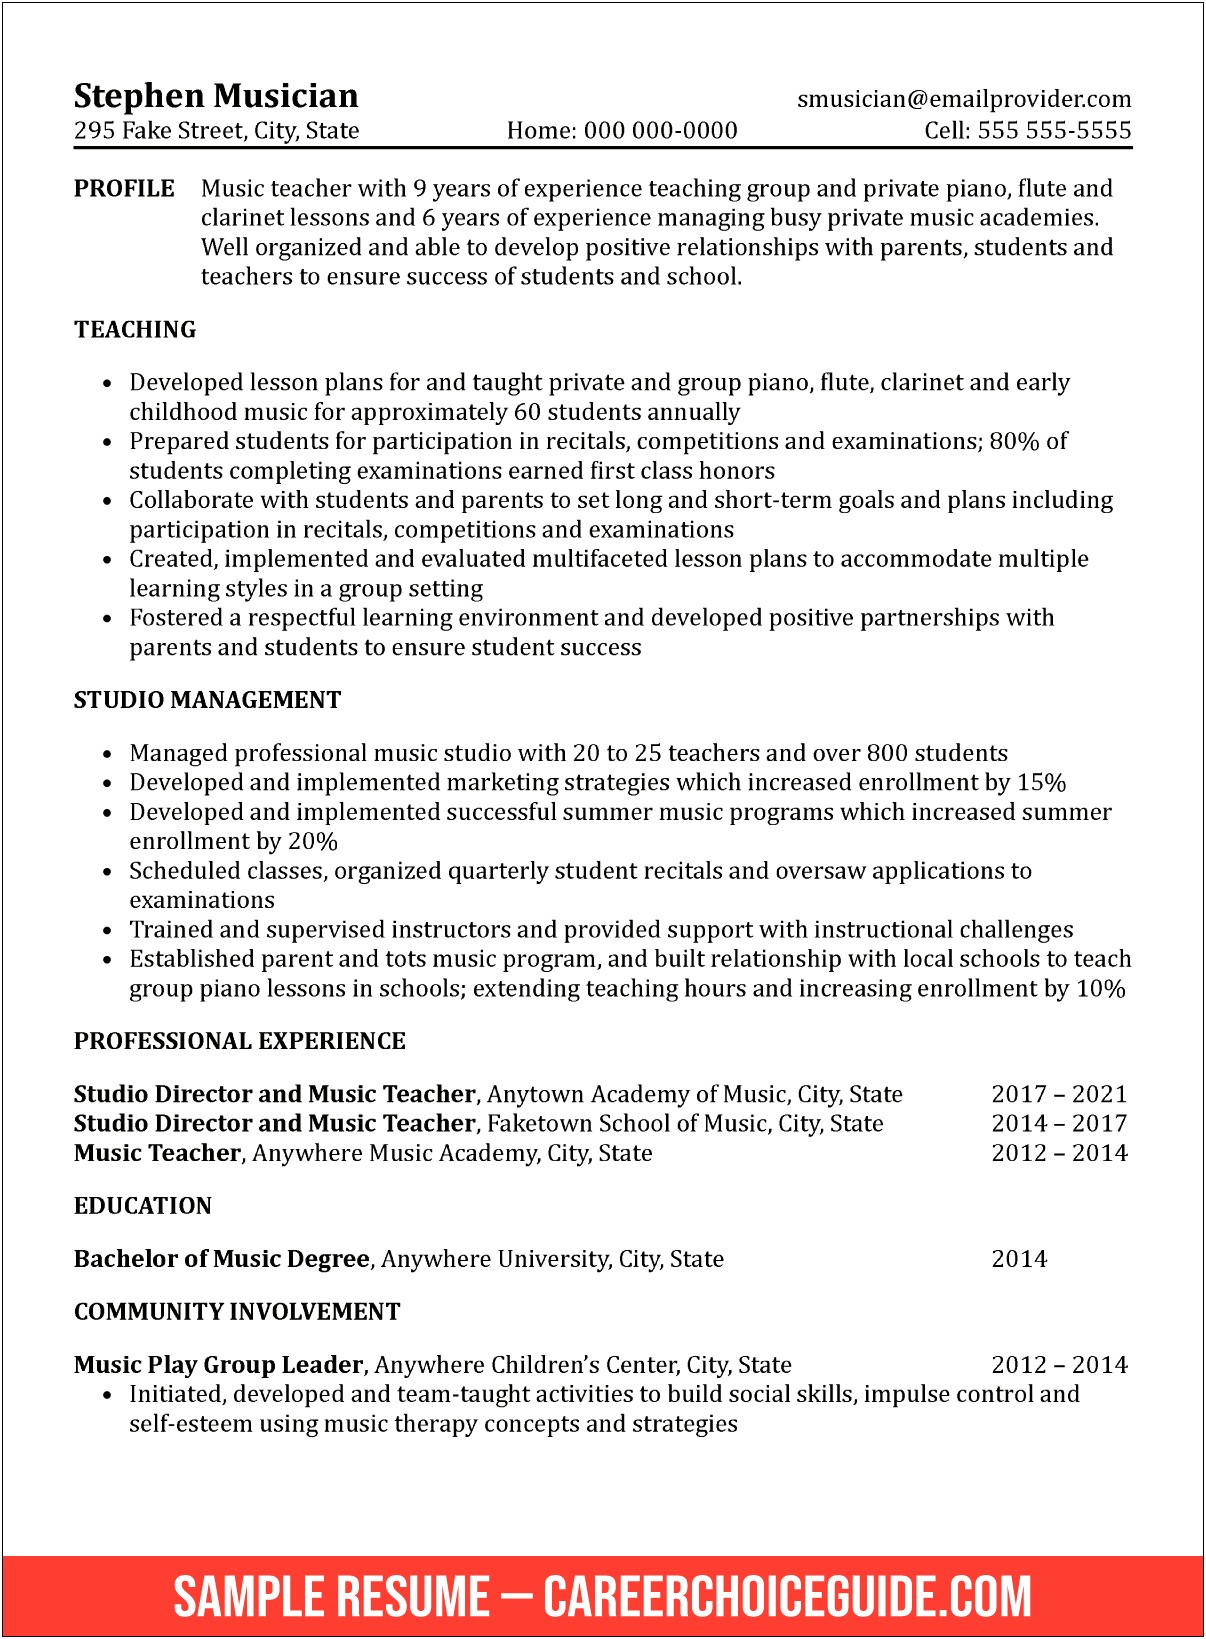 Example Resume Work Experience Section